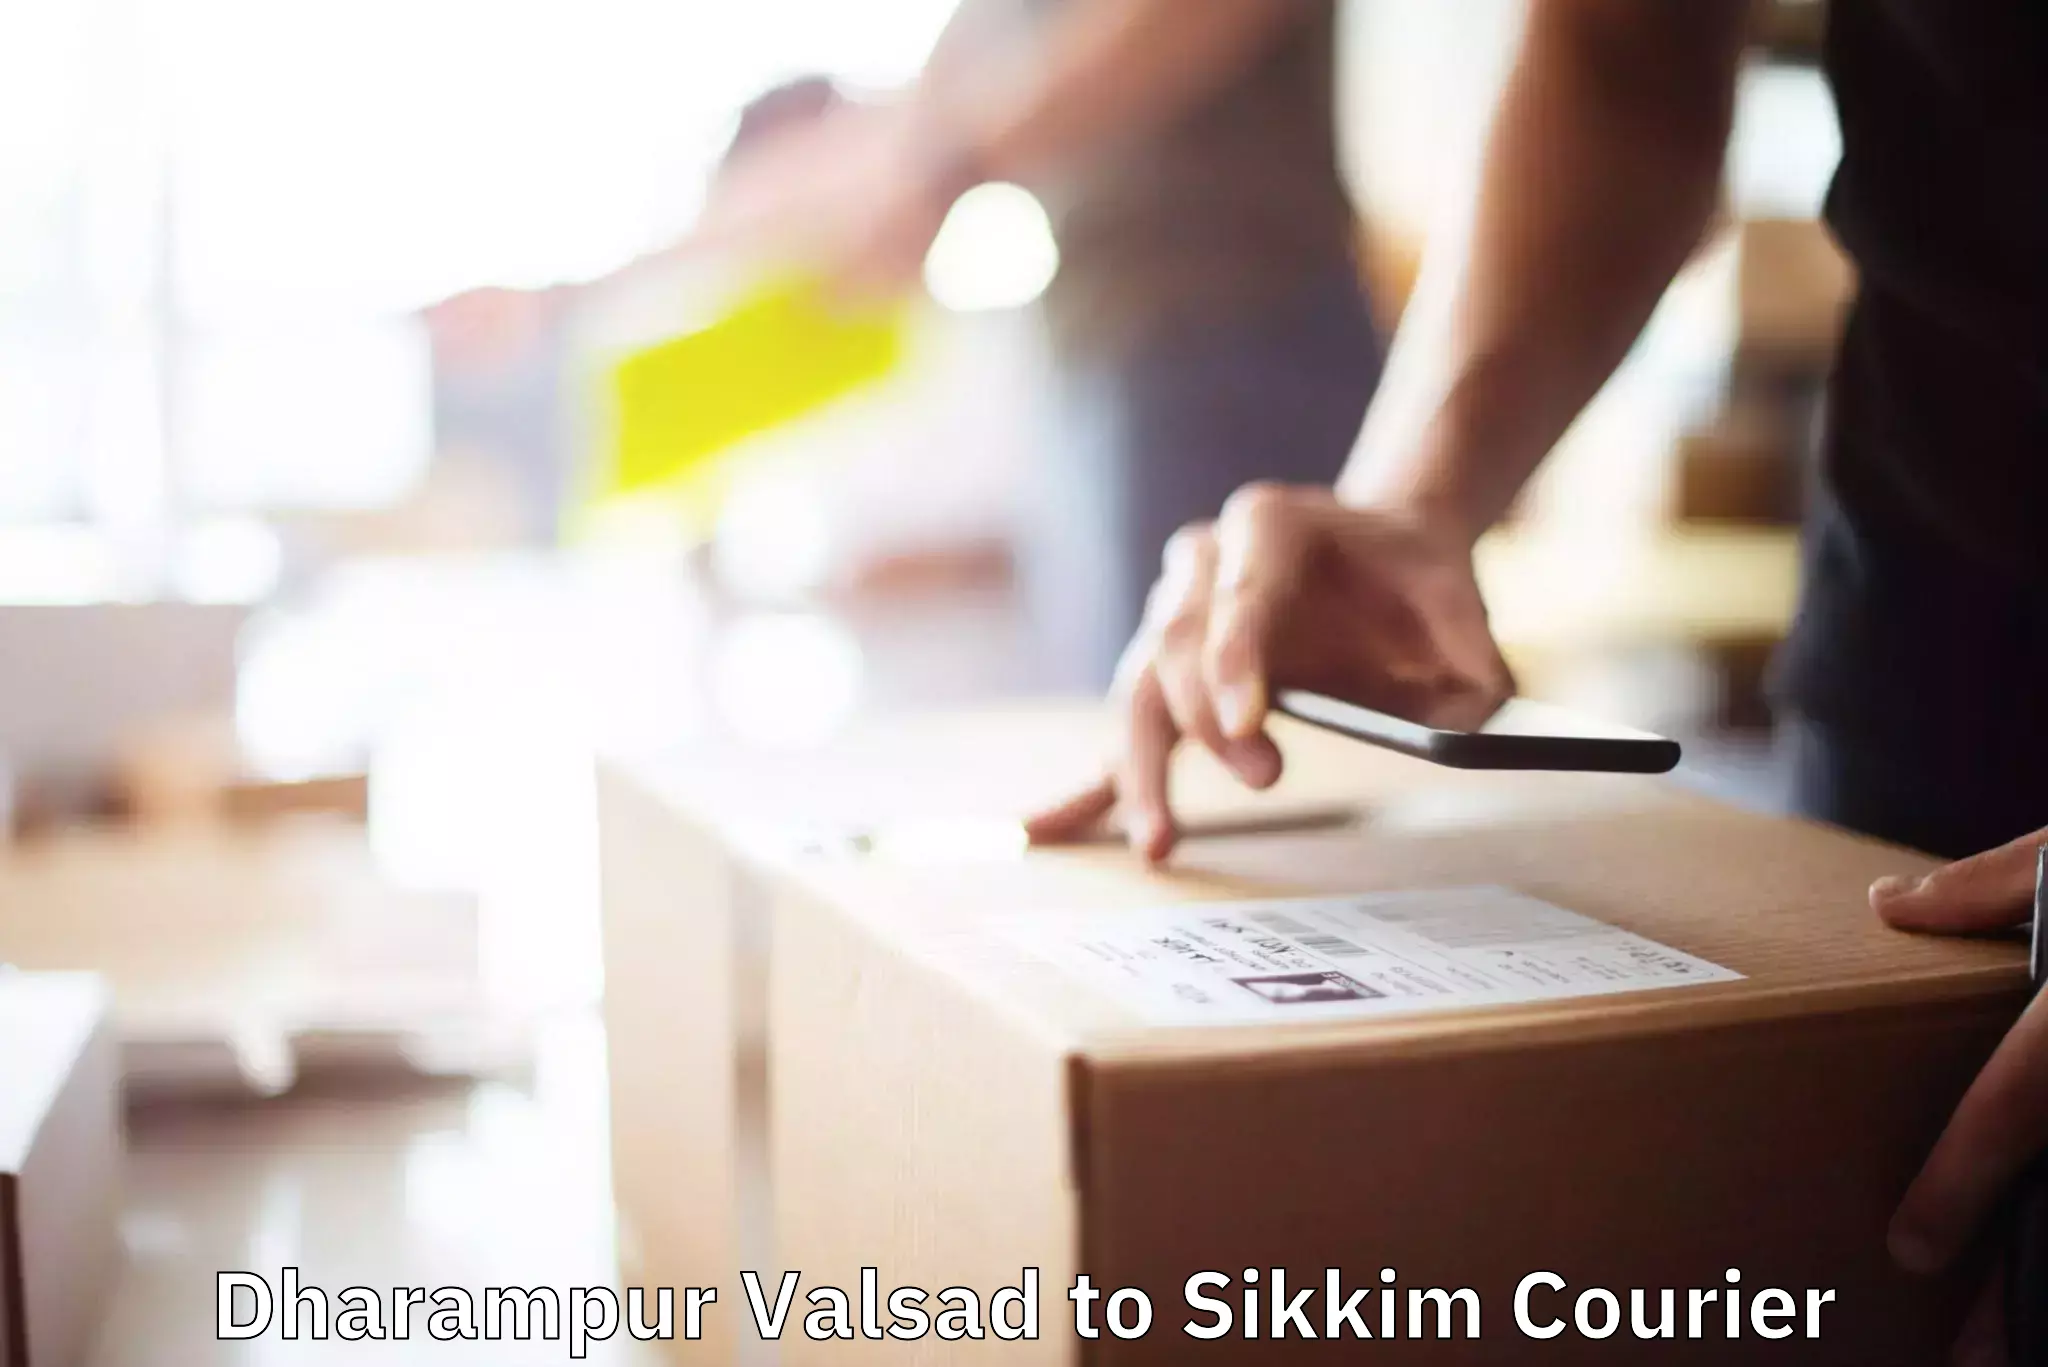 Budget-friendly movers Dharampur Valsad to West Sikkim